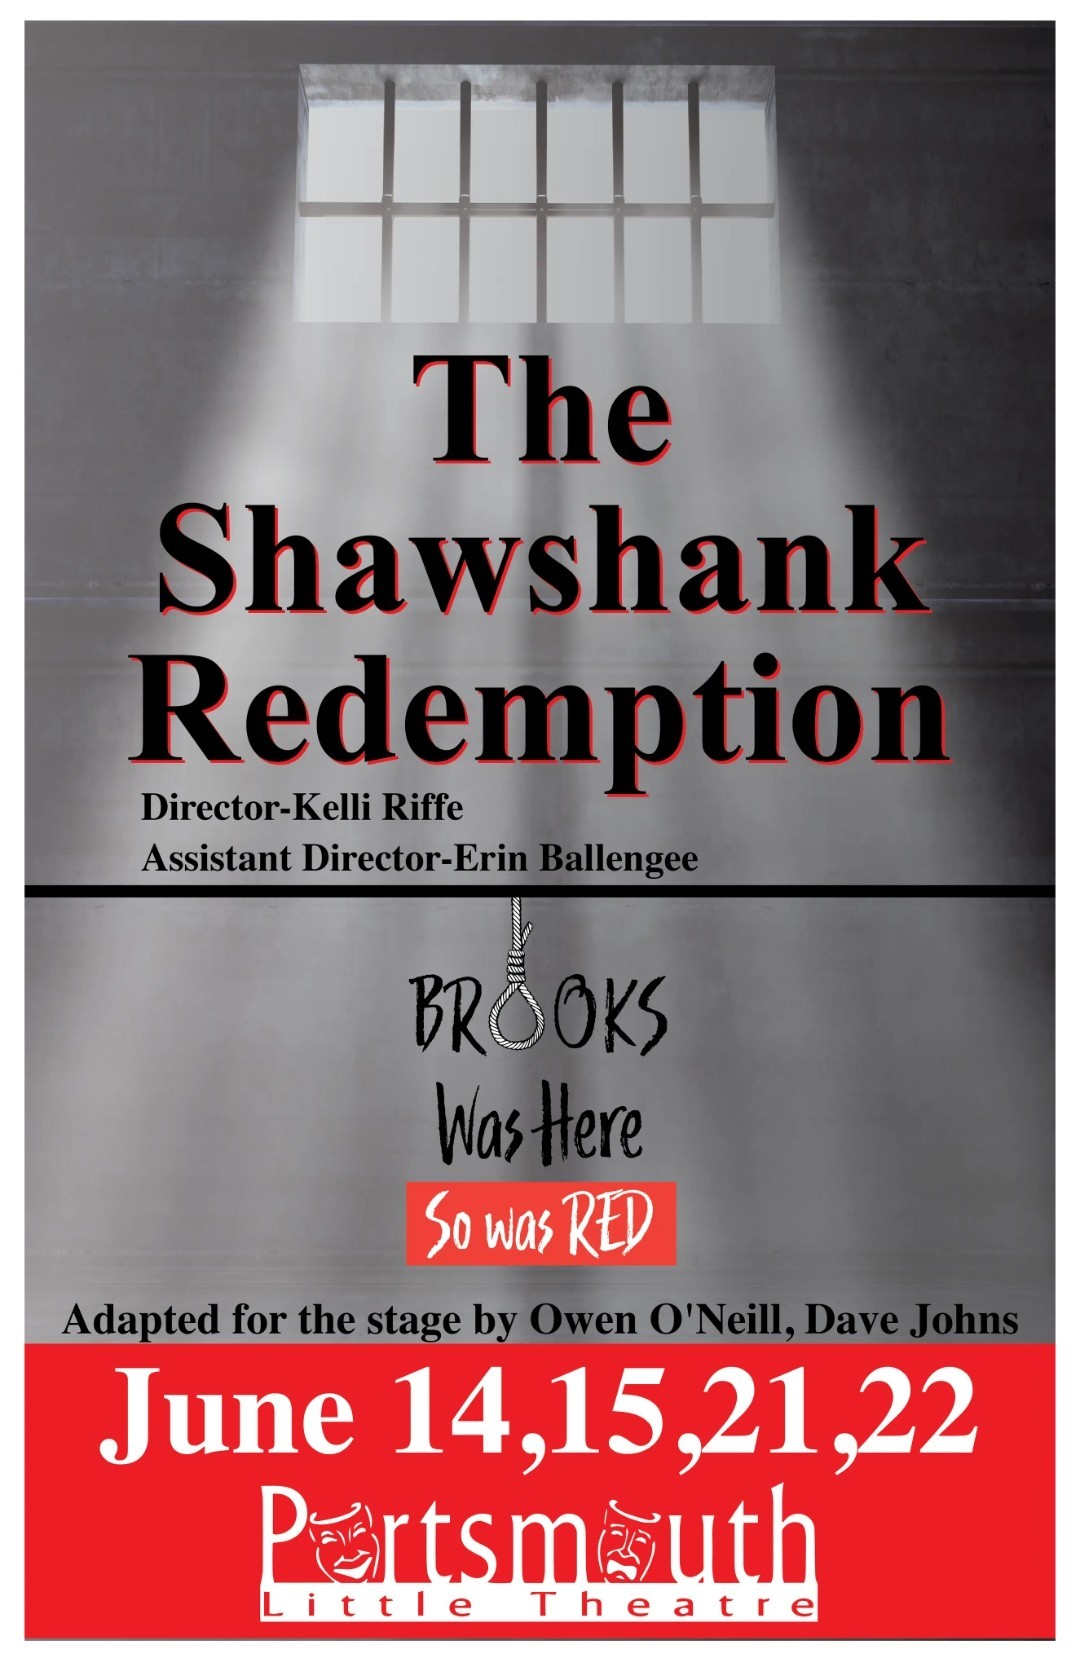 Shawshank Redemption  on Jun 14, 19:30@Portsmouth Little Theatre - Pick a seat, Buy tickets and Get information on Portsmouth Little Theatre 